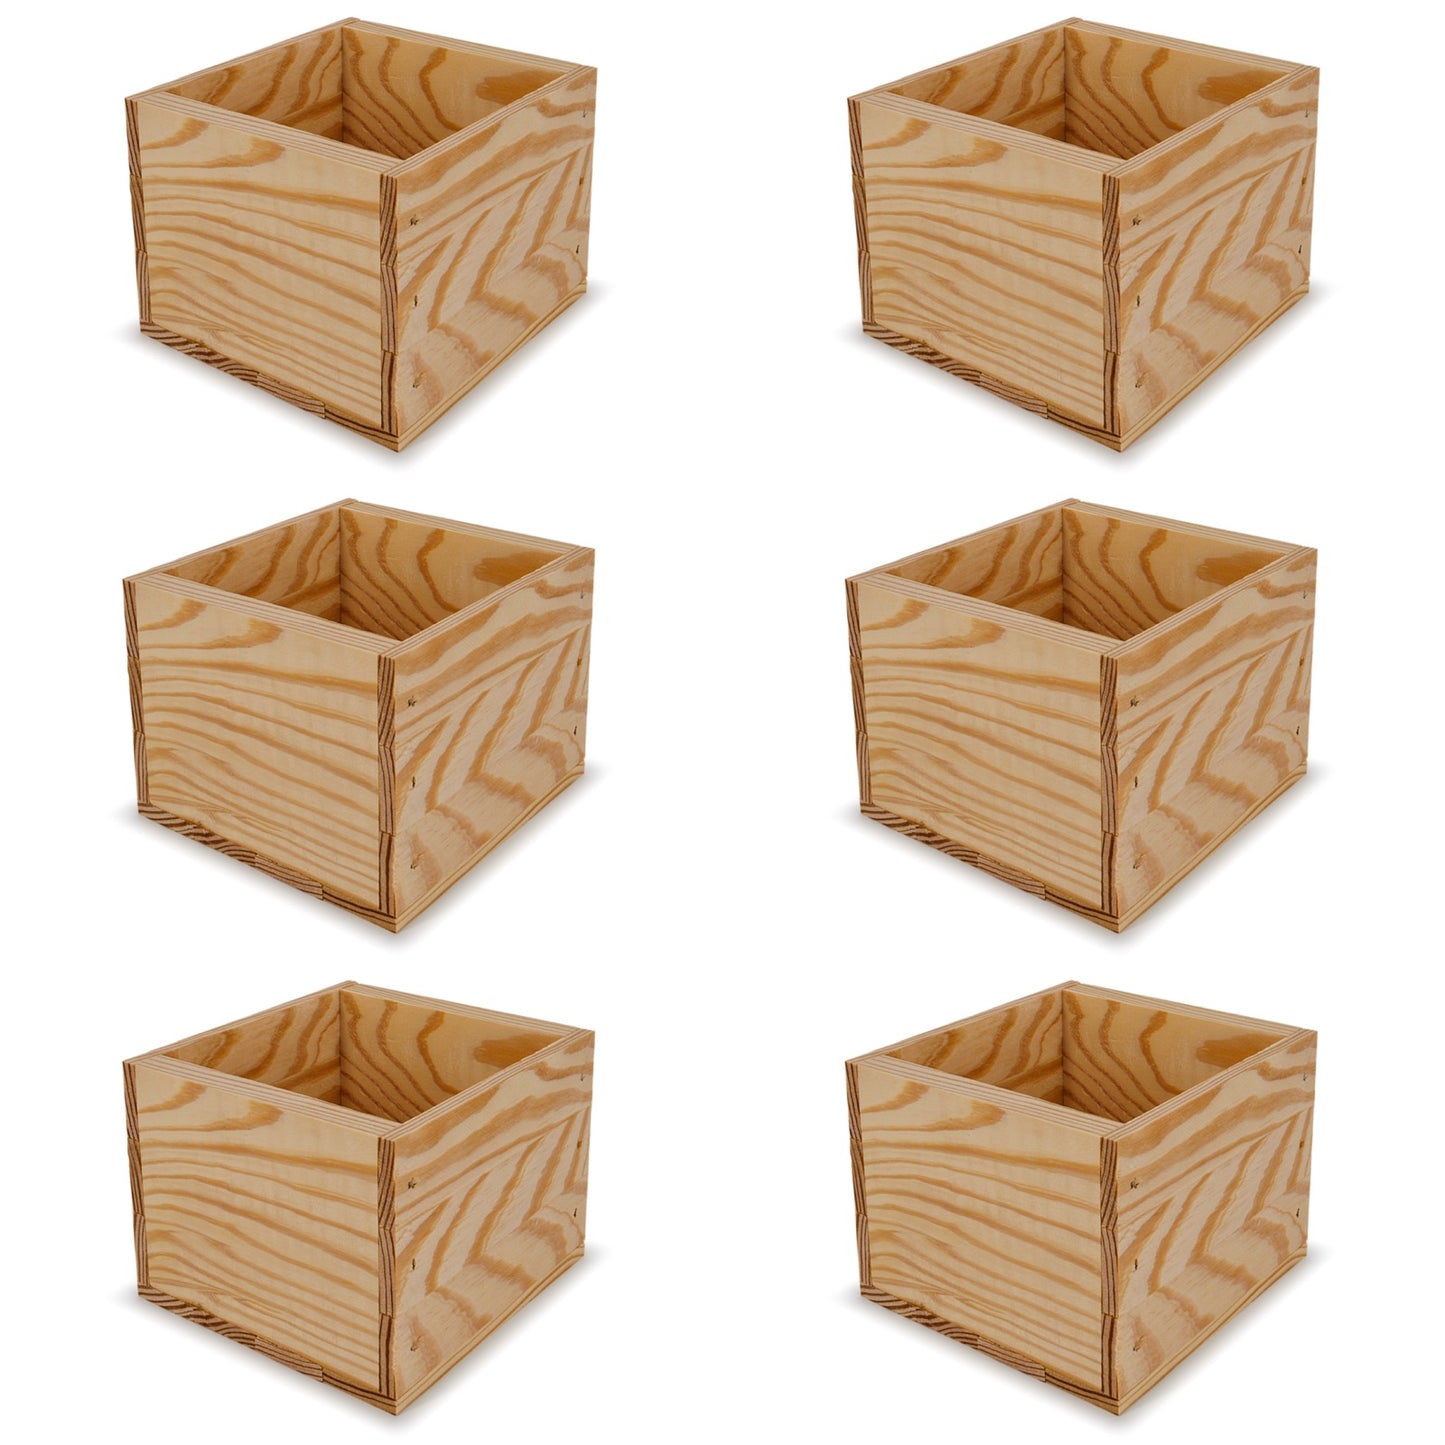 6 Small wooden crates 6x6.25x5.25